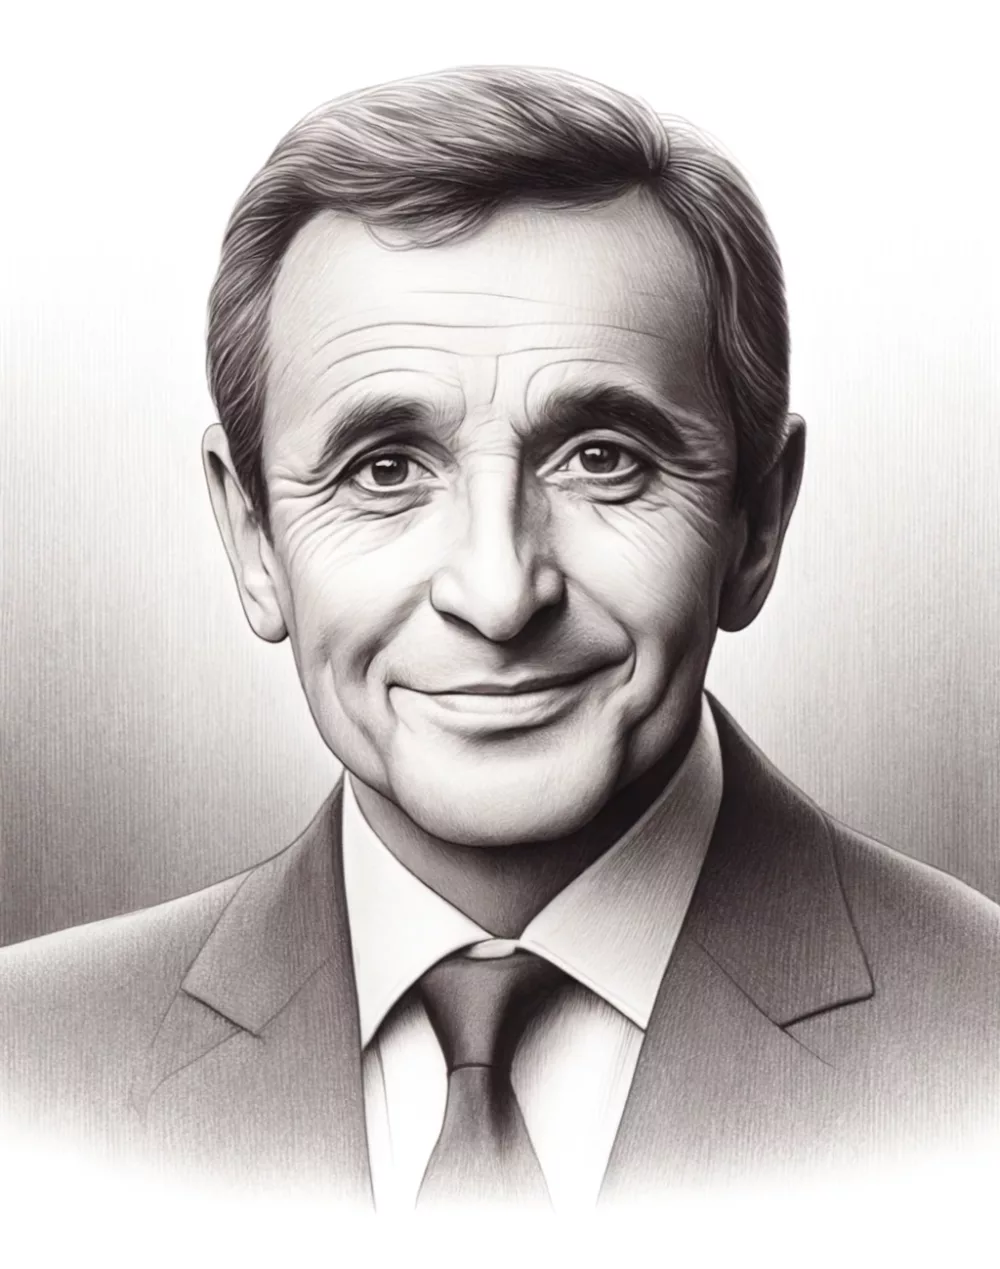 DALL·E 2024 05 18 12.33.00 A detailed pencil drawing of Charles Aznavour. He has a kind and expressive face with deep set eyes prominent cheekbones and a gentle smile. His hai